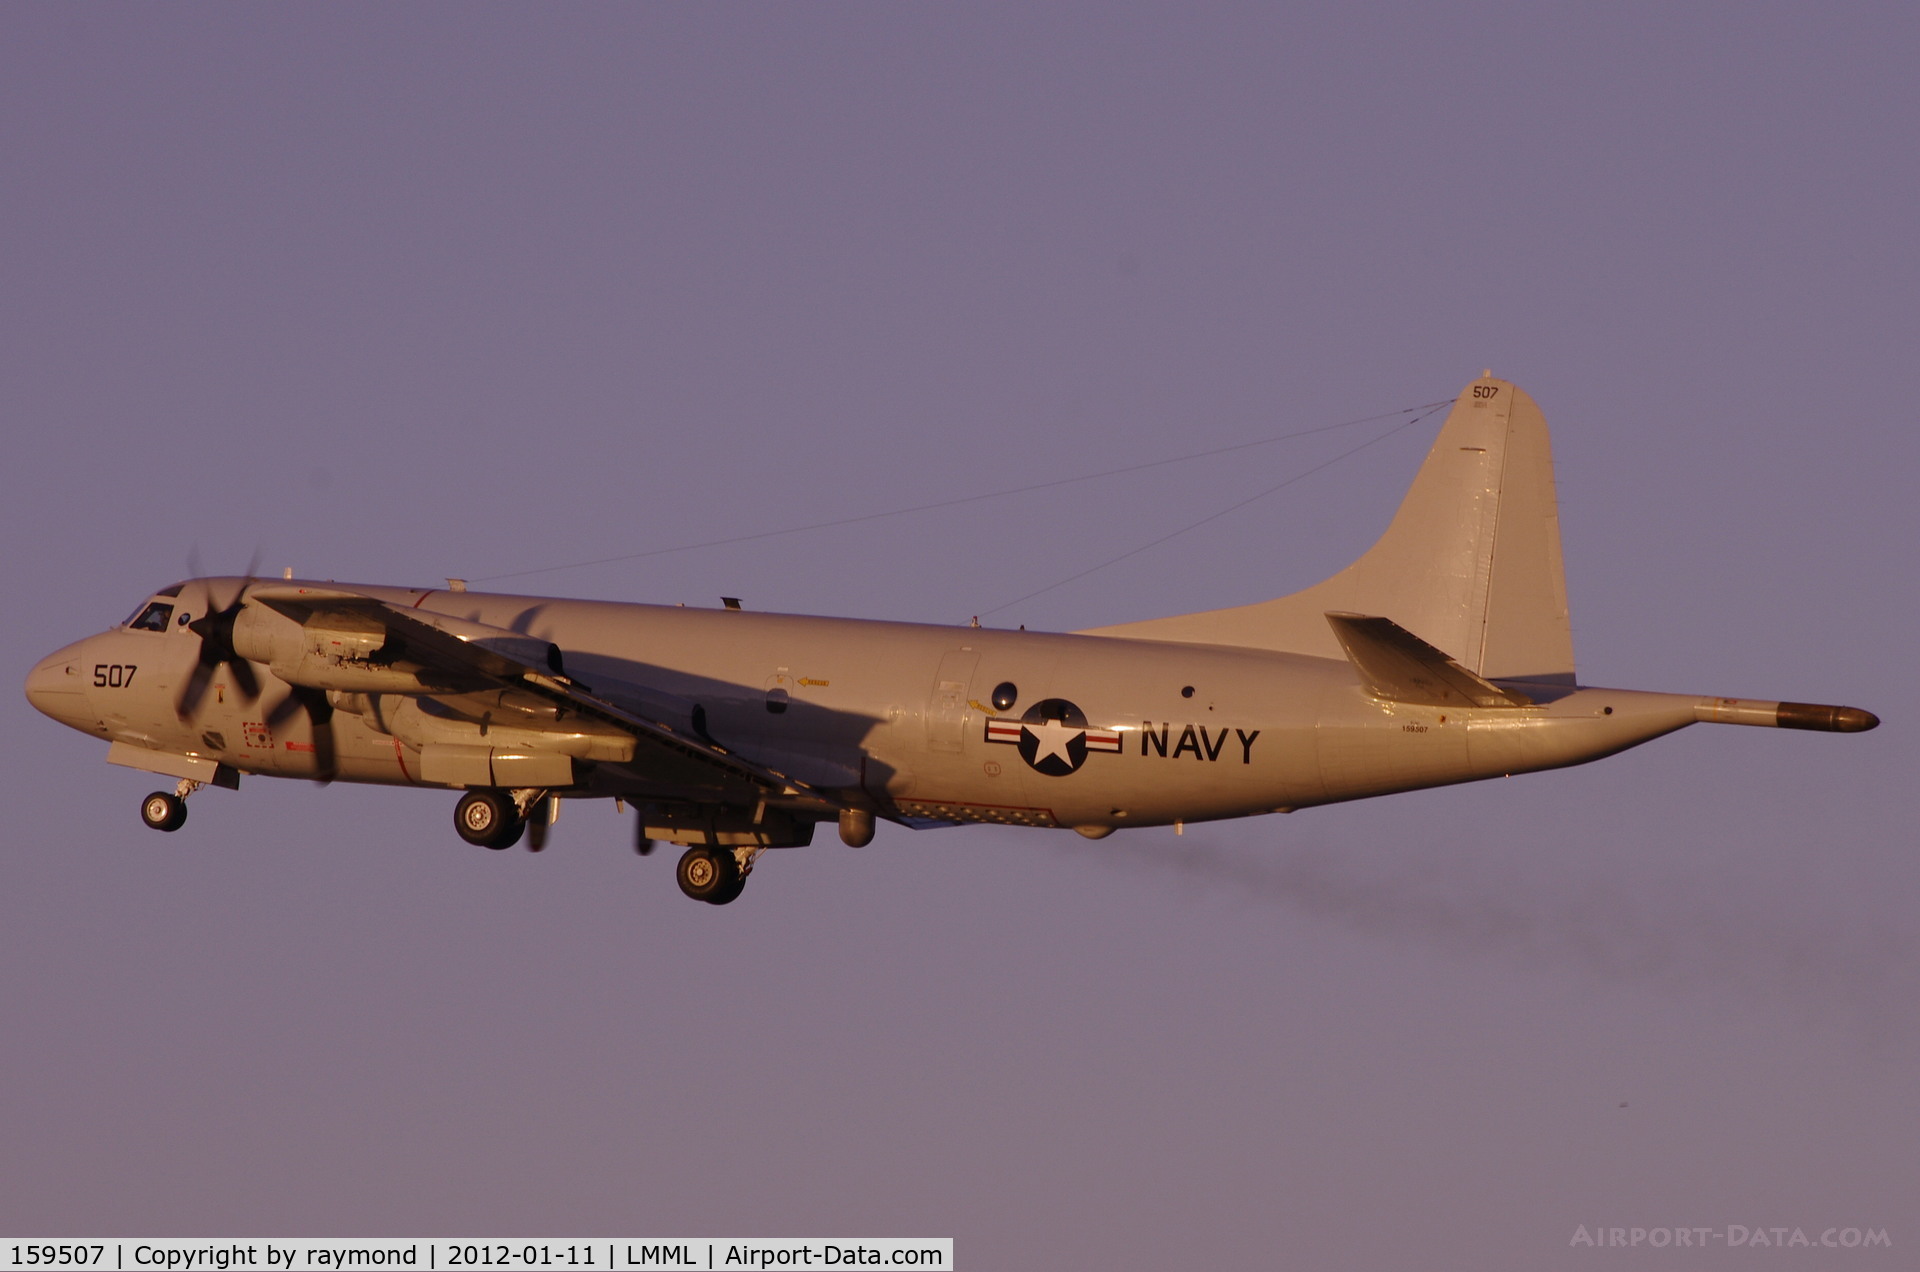 159507, Lockheed P-3C Orion C/N 285A-5625, P3-C Orion 159507 of United States Navy performed some touch and goes in Malta and continued to destination on 11 Jan 12.